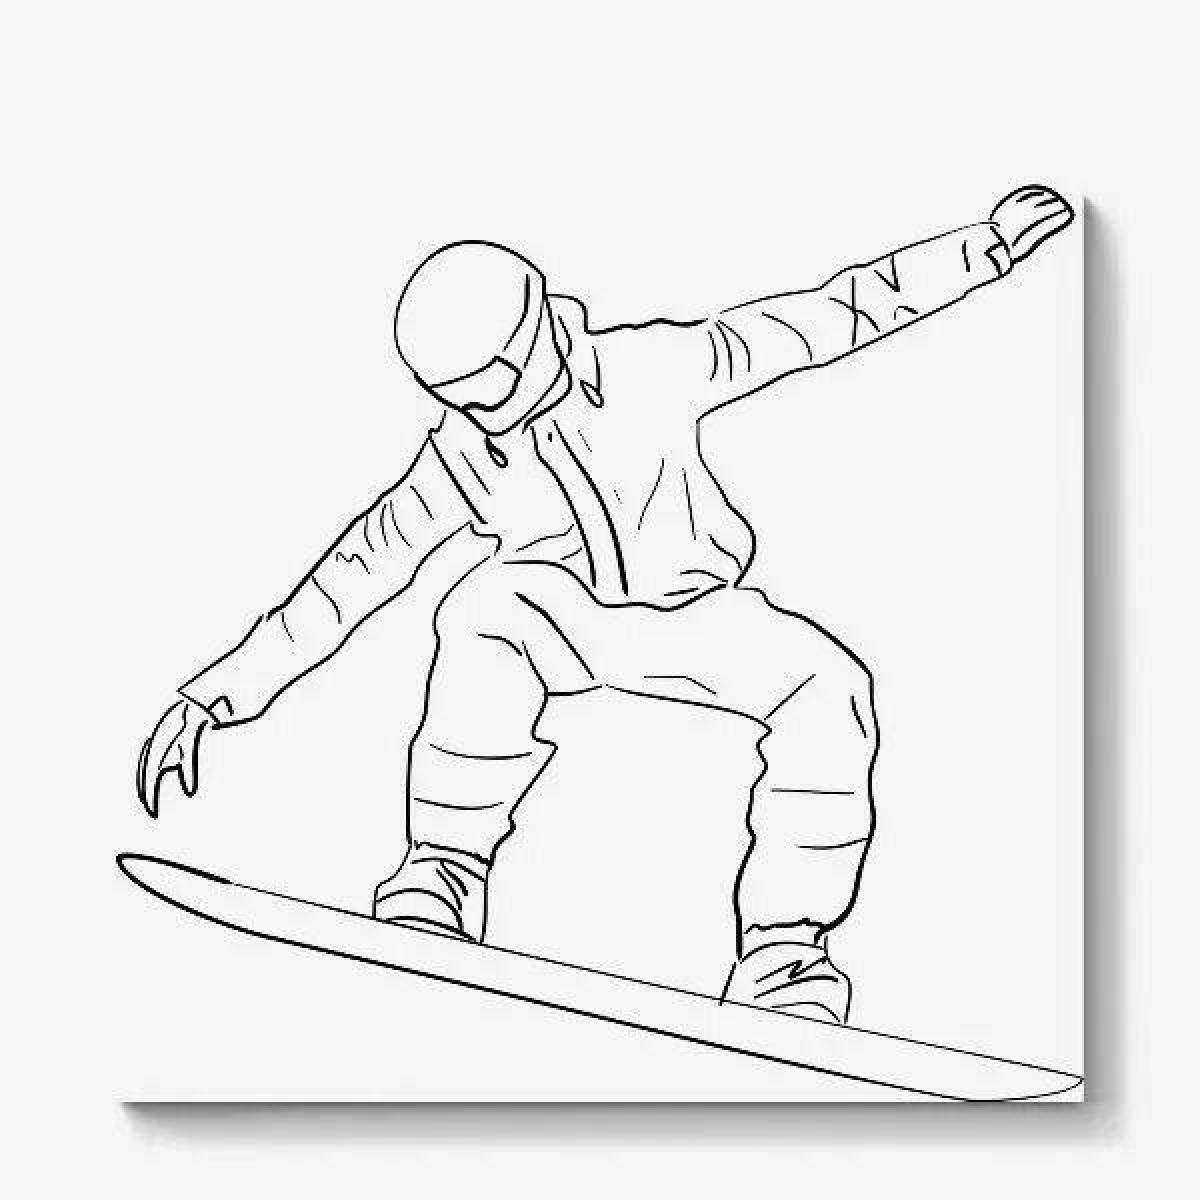 Coloring bright snowboarder